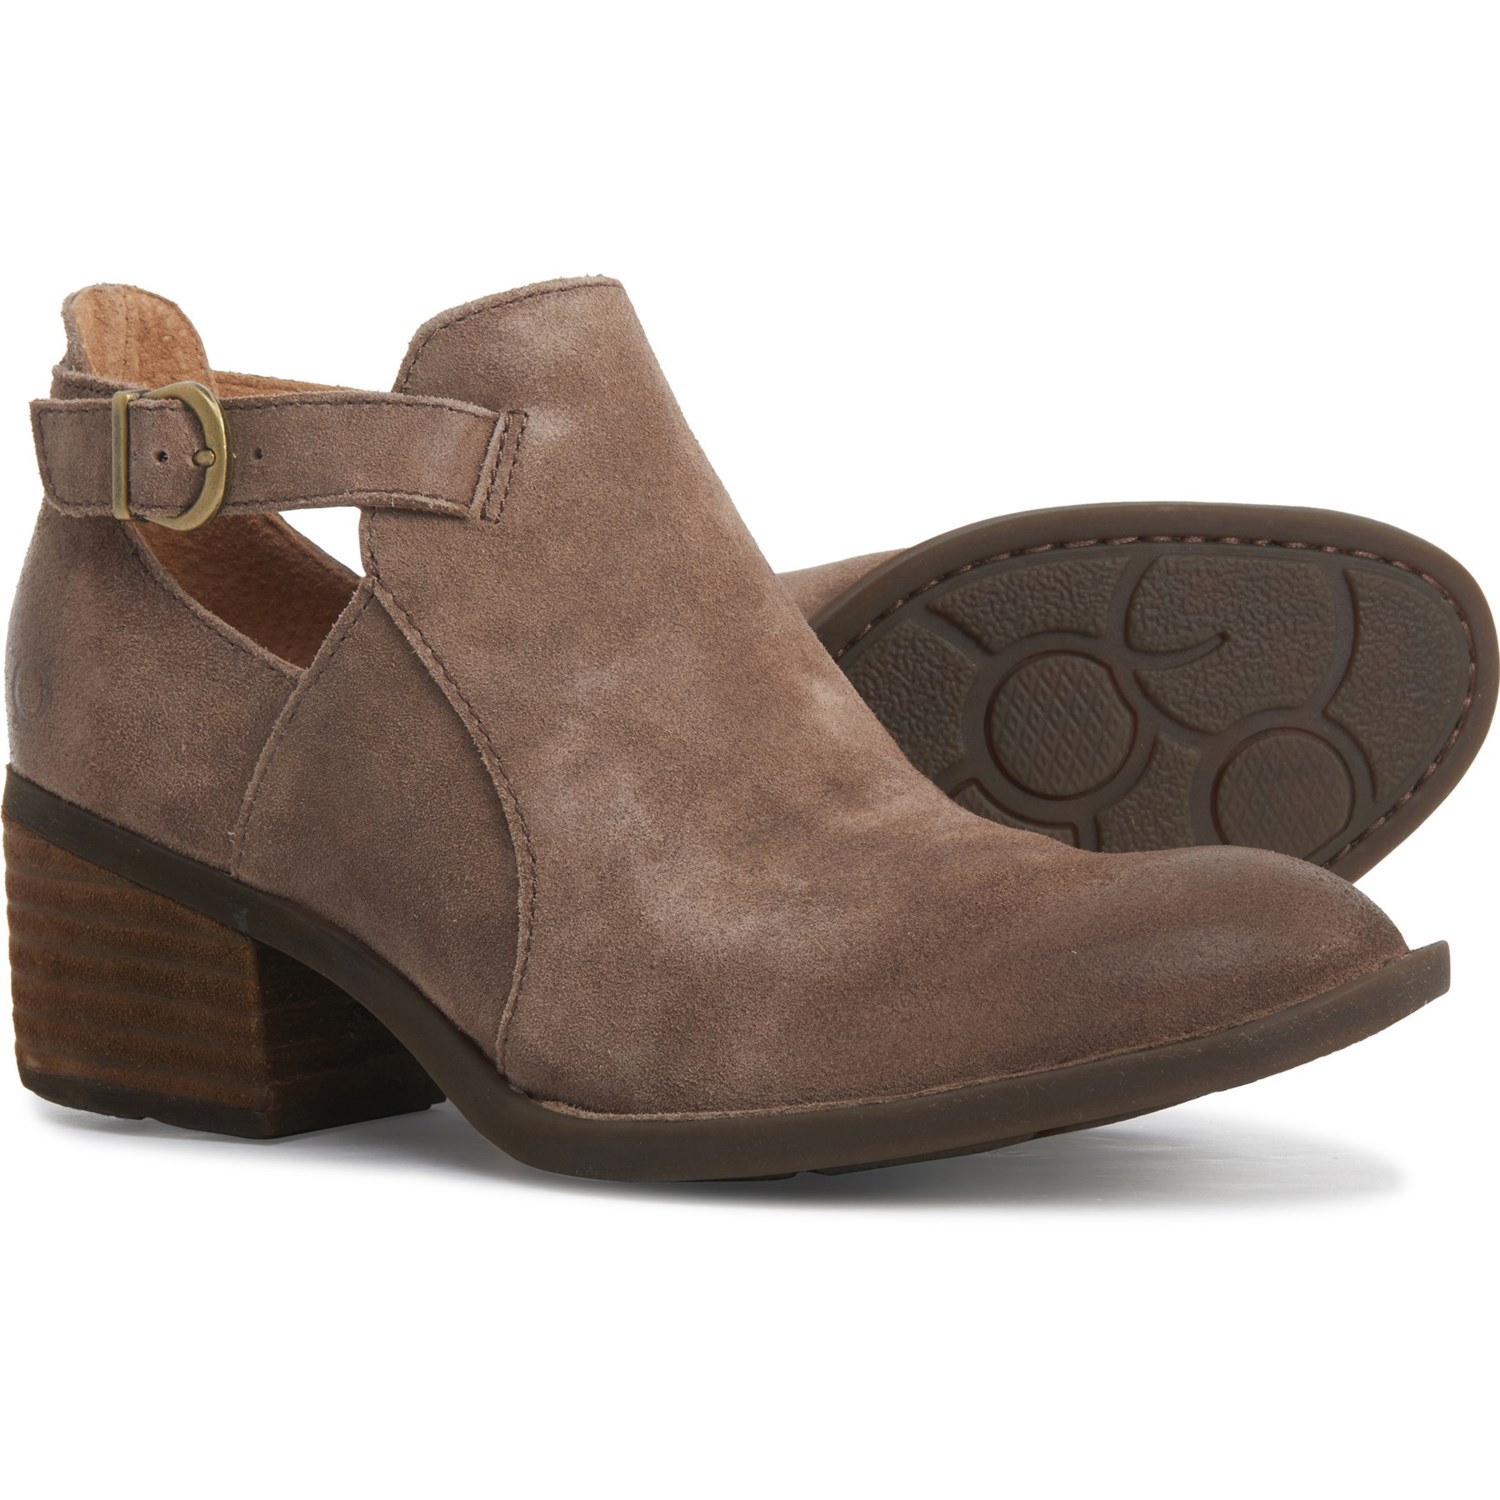 born suede ankle boots